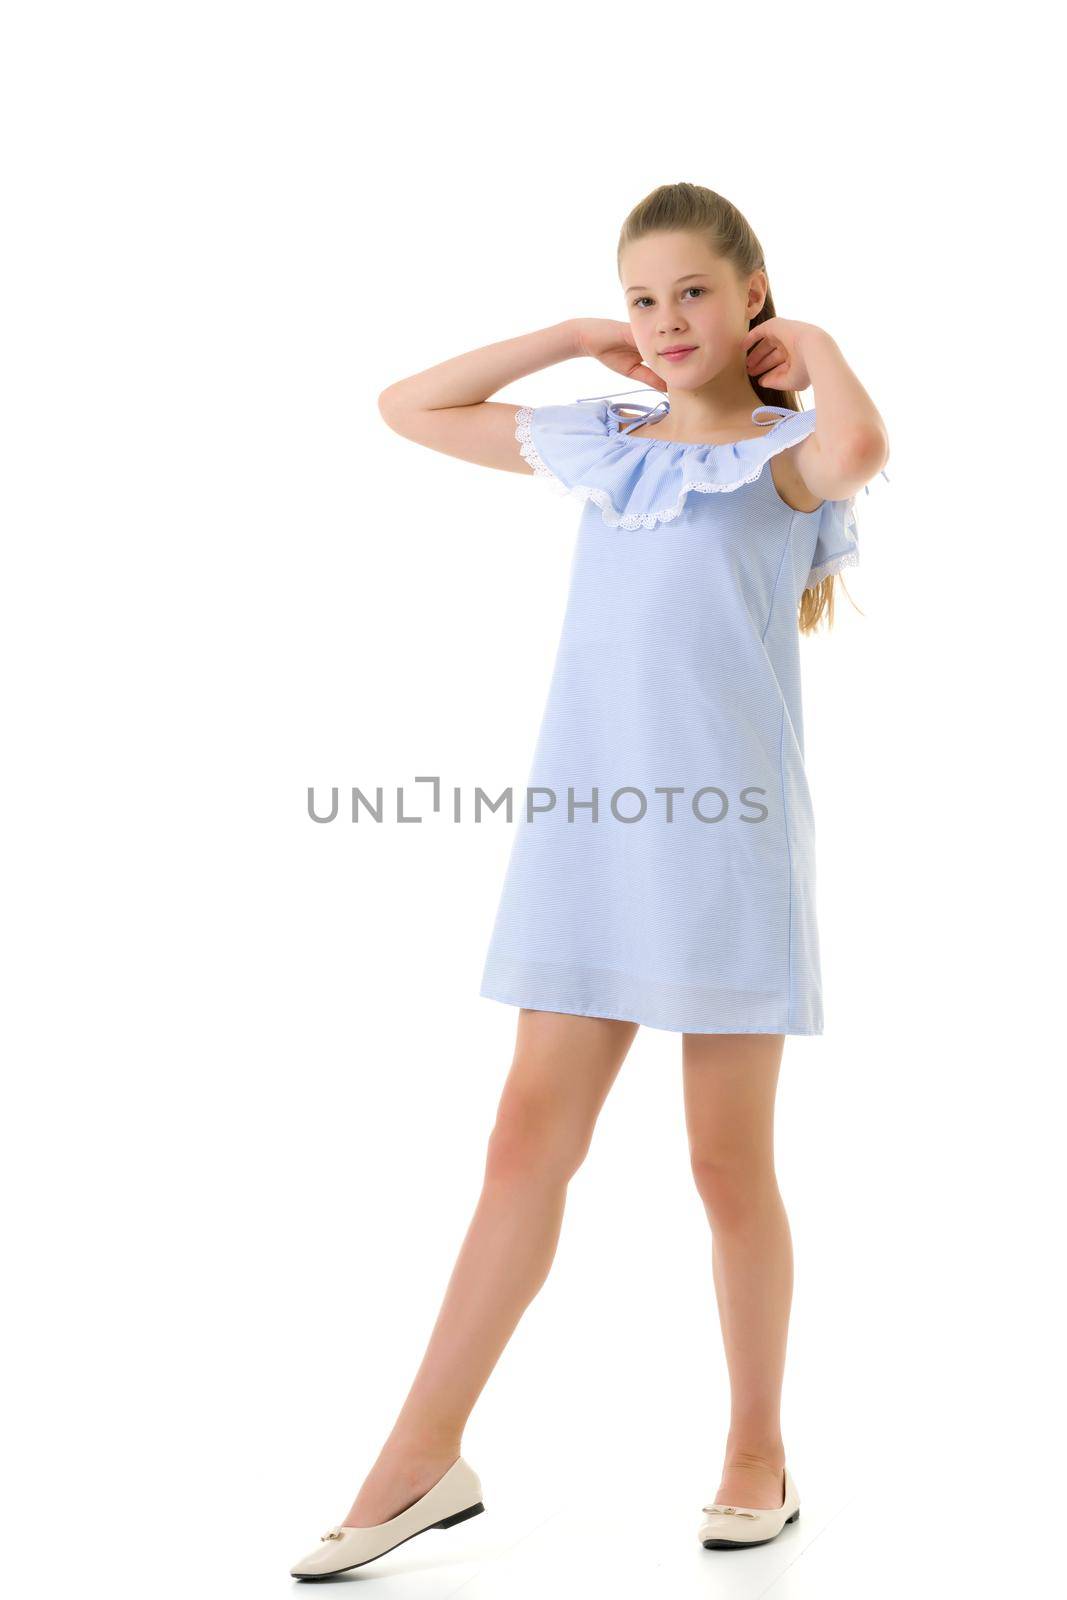 Teen Girl Standing with Raising Hands and Looking at Camera, Portrait of Beautiful Girl in Light Sundress and Beige Shoes, Pretty Teenager in Stylish Clothes Posing in Studio Against White Background